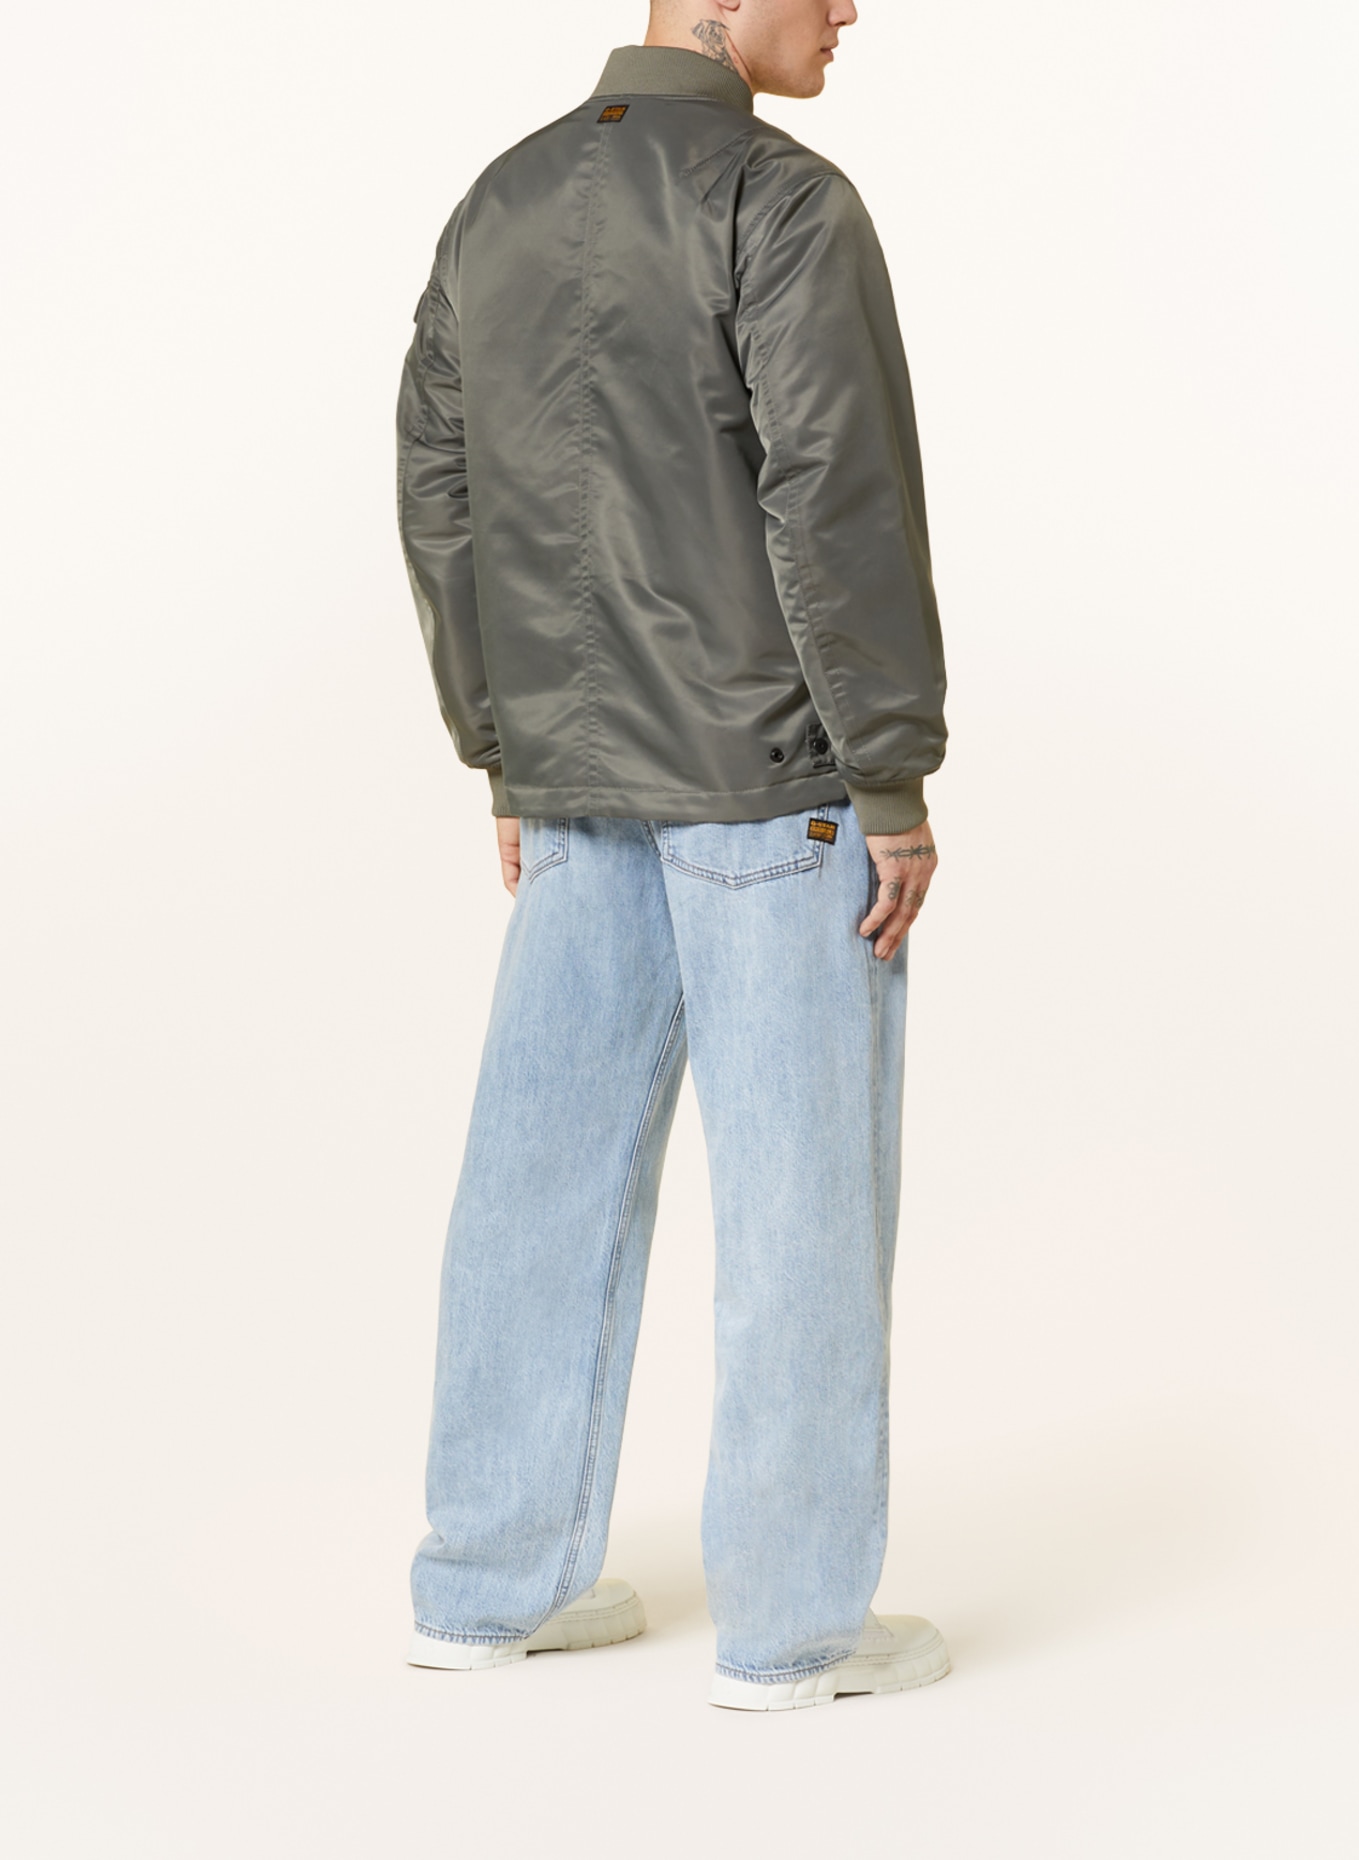 G-Star RAW Reversible bomber jacket DECK, Color: GRAY (Image 3)